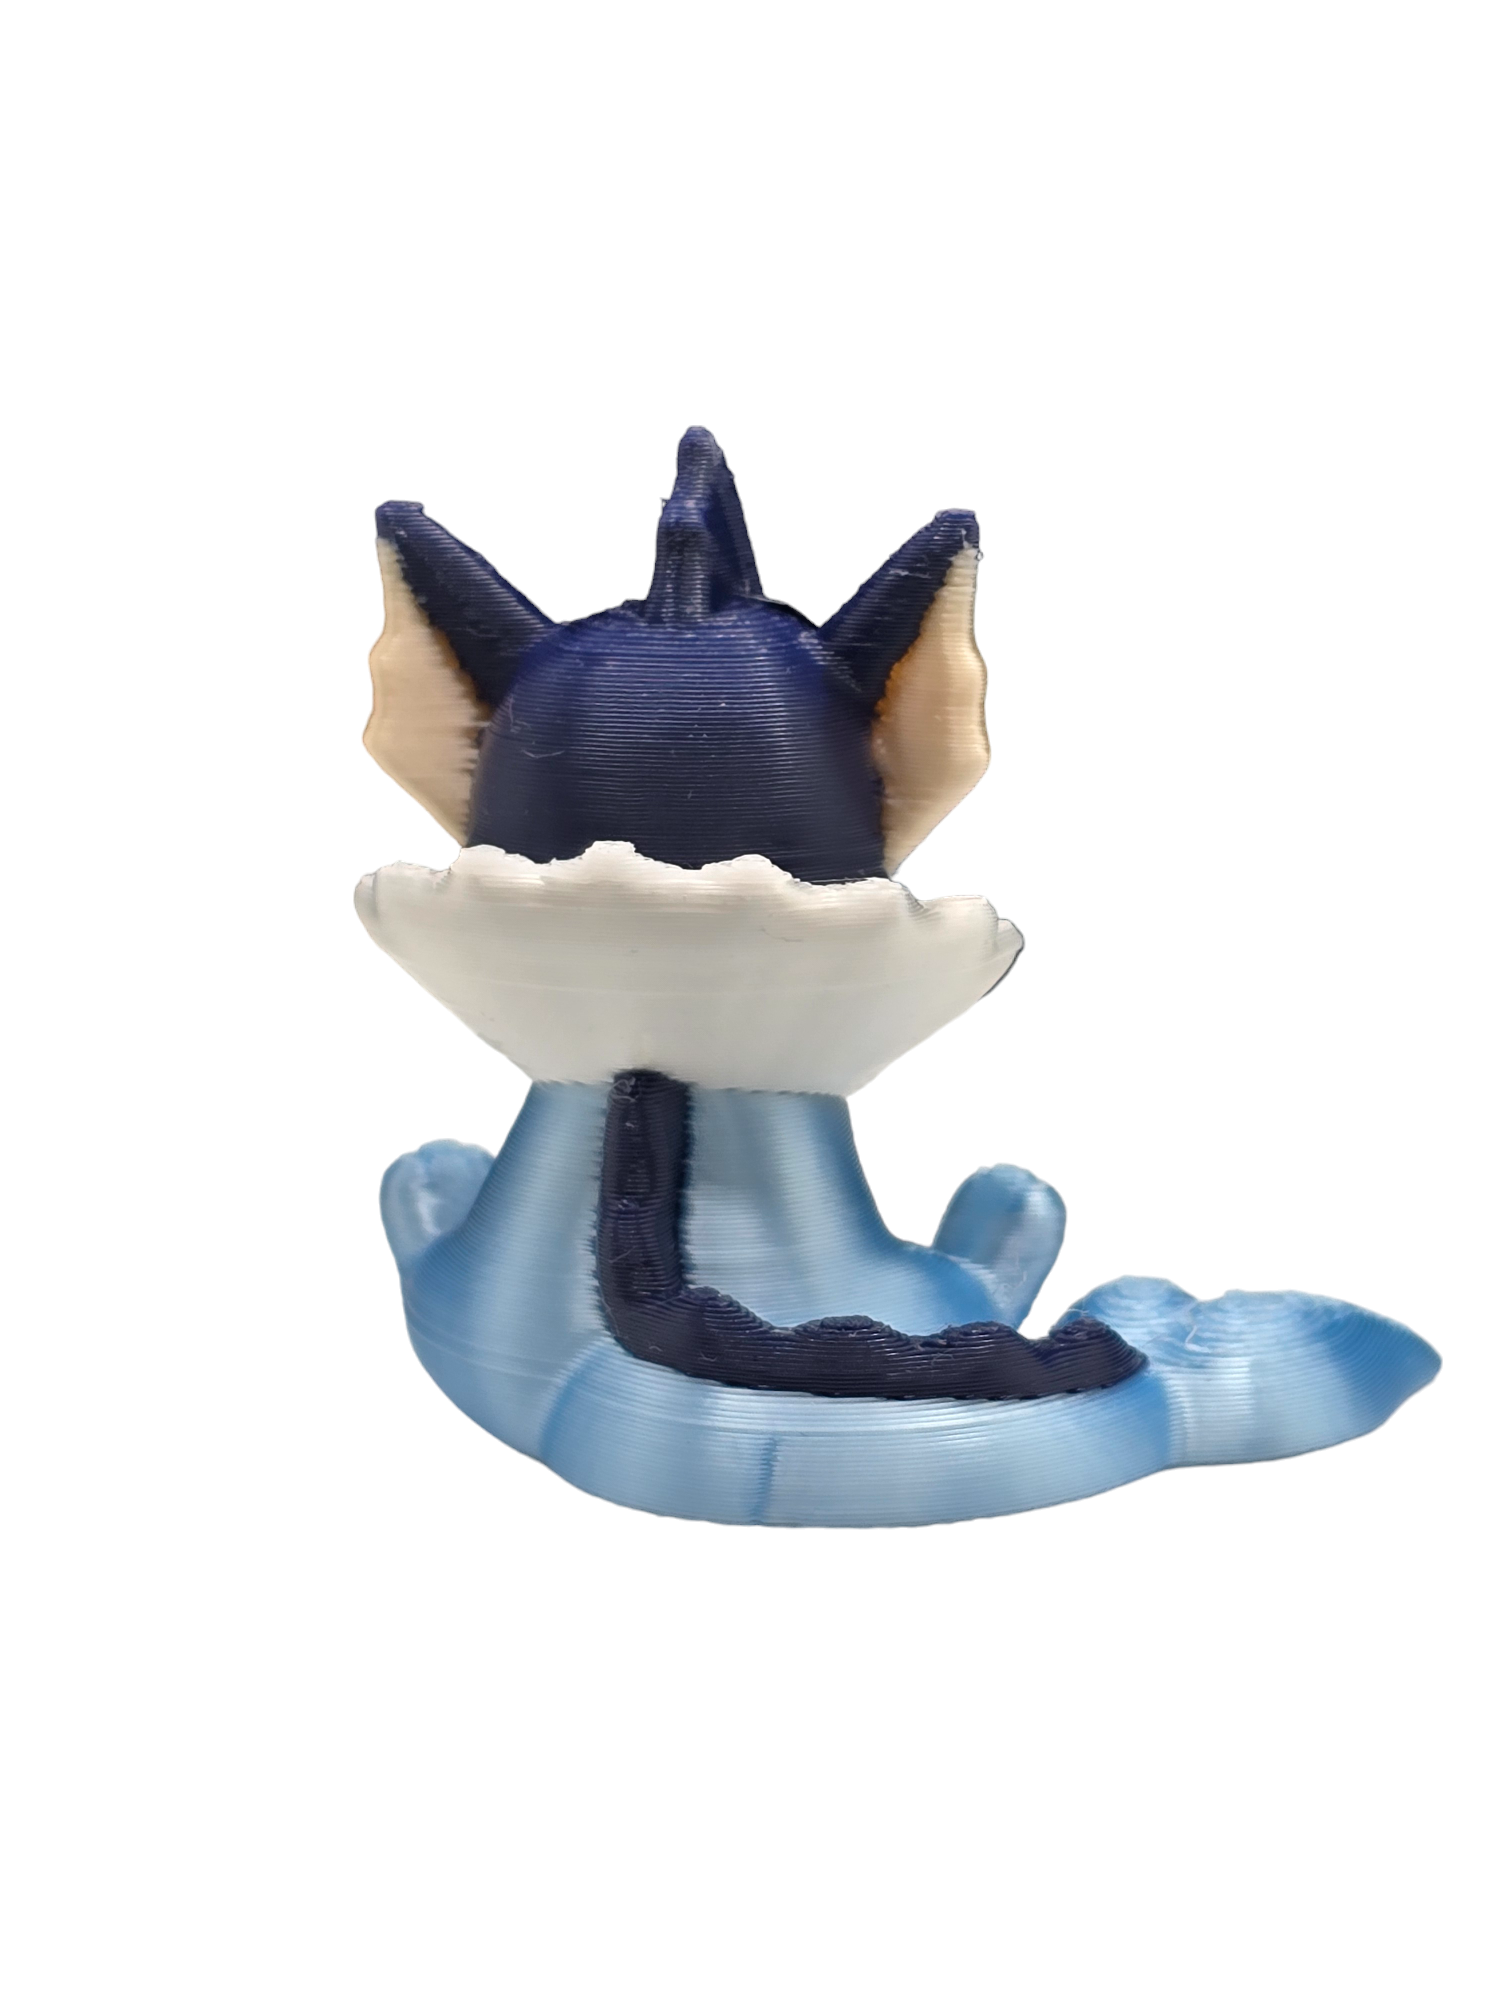 a blue and white figurine of a cat